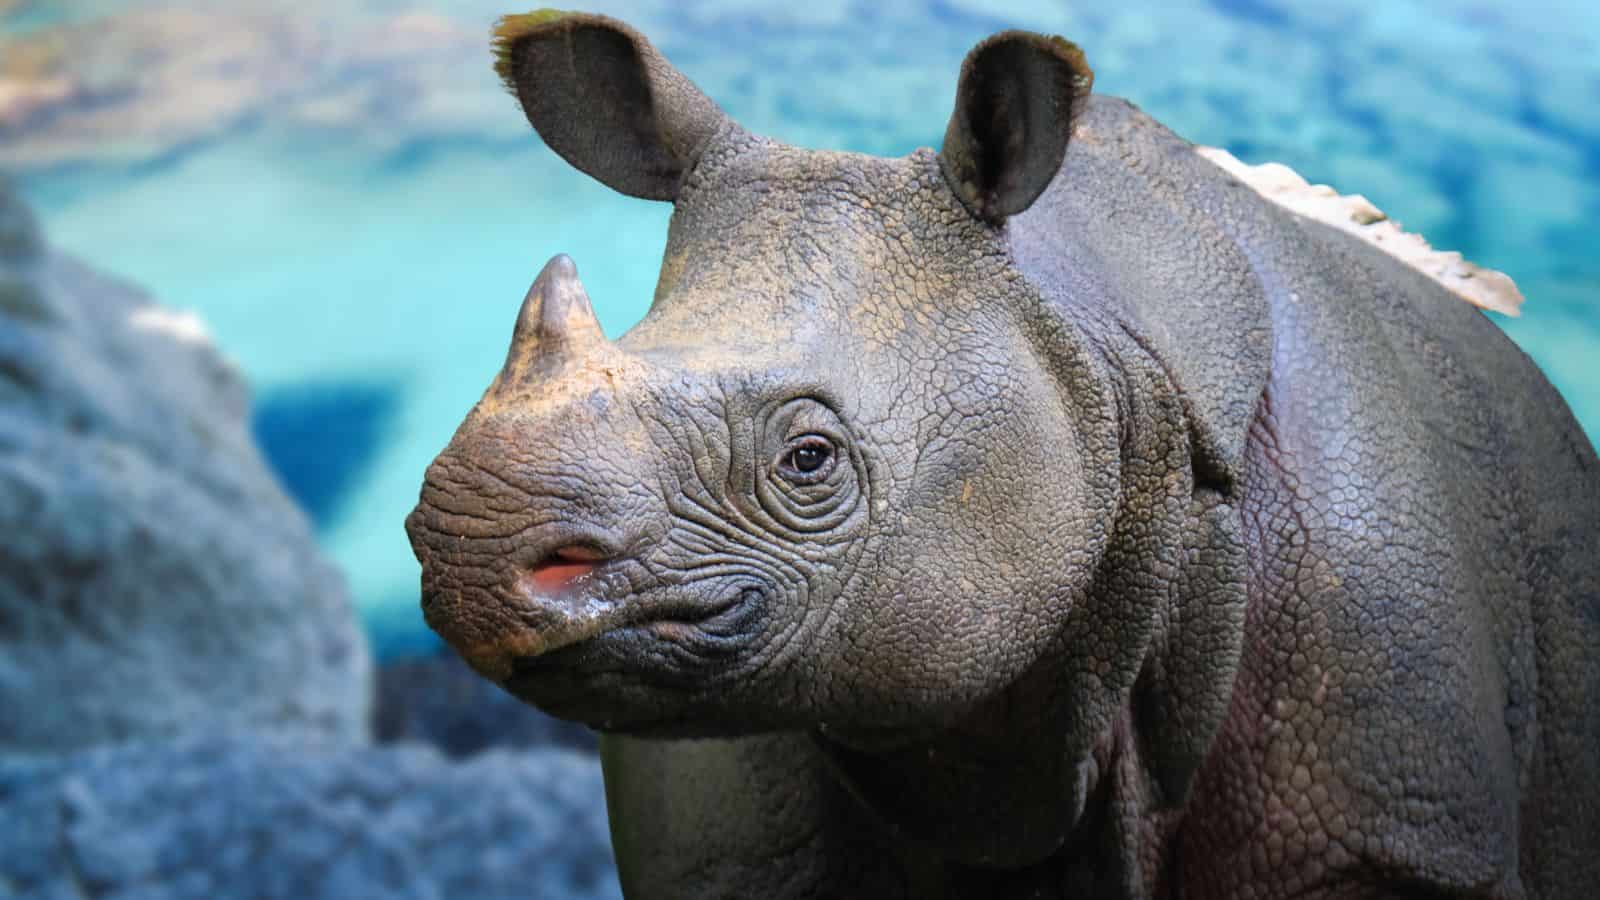 <p><span>The Javan rhino can only be found in Indonesia’s Ujung Kulon National Park, highlighting the severity of its population crisis. Only around 60 members of the species remain due to challenges like poaching, habitat loss, and the animal’s low genetic diversity.</span></p>